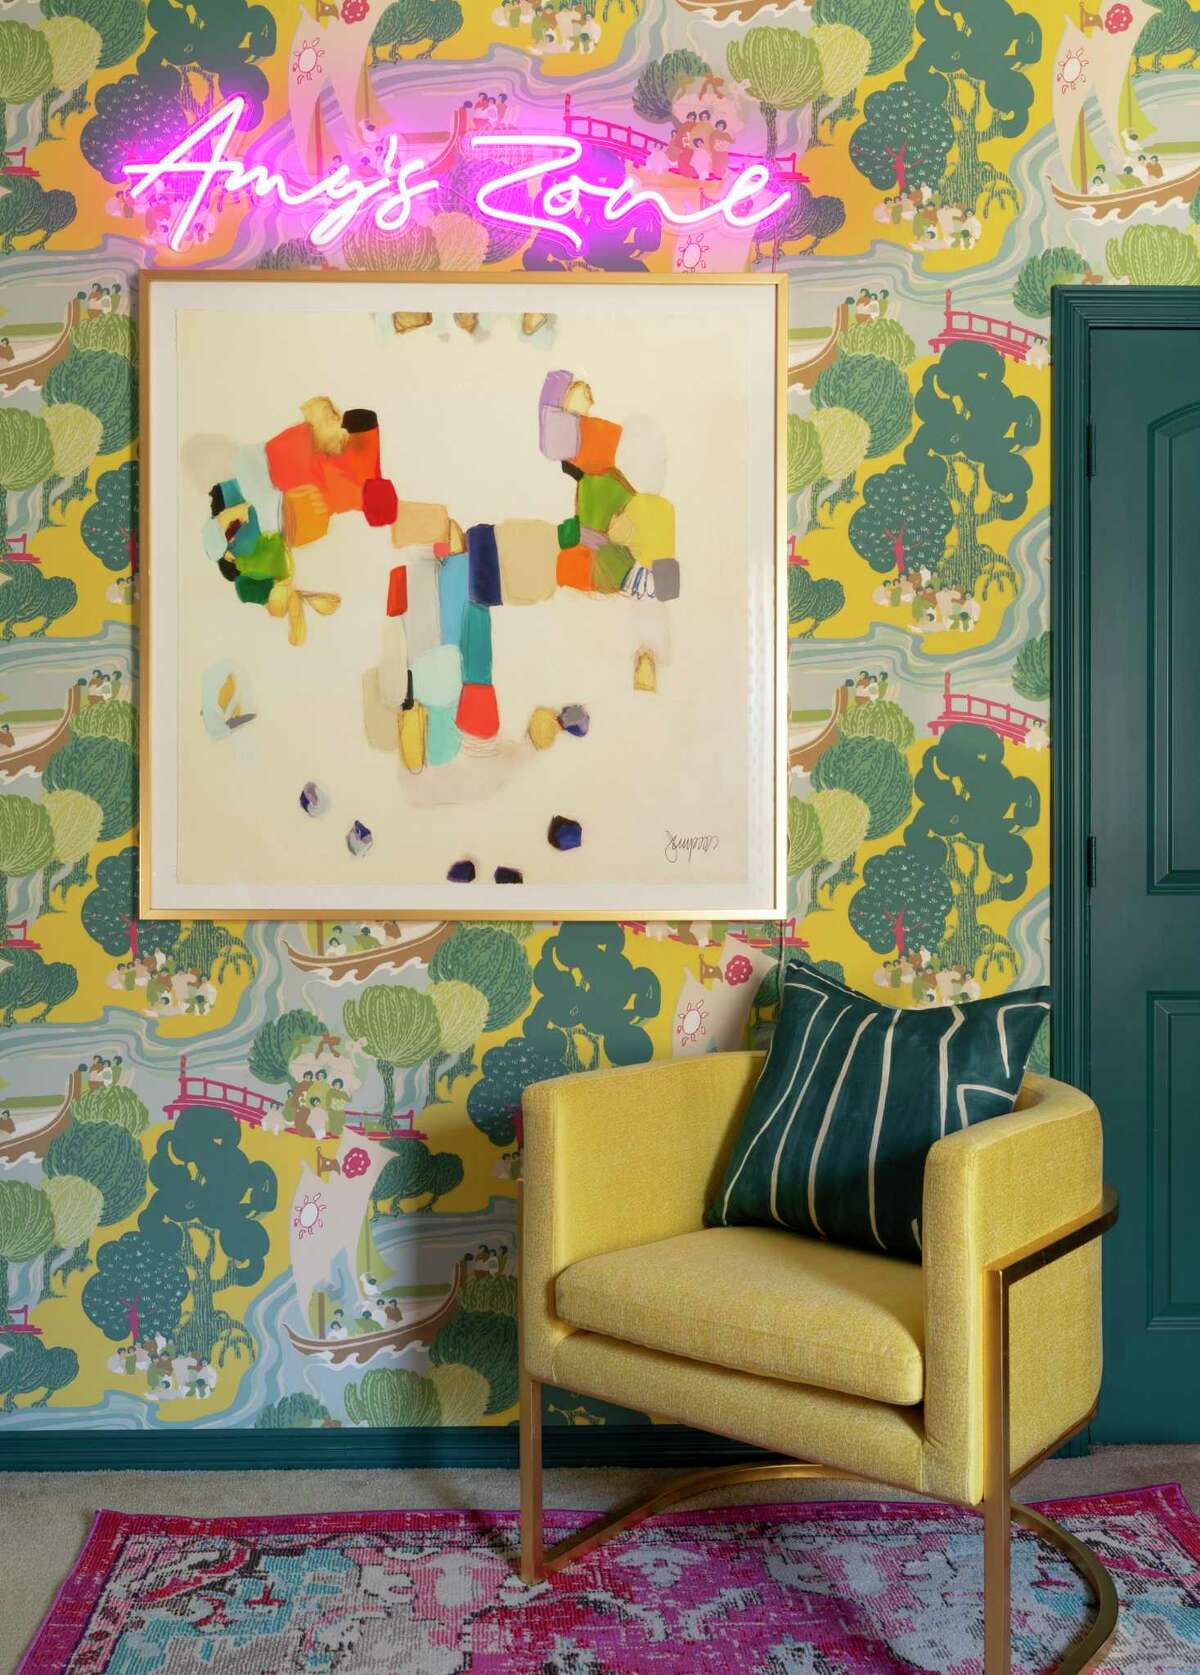 This vignette shows the full palette in the home office: teal, yellow and pink.